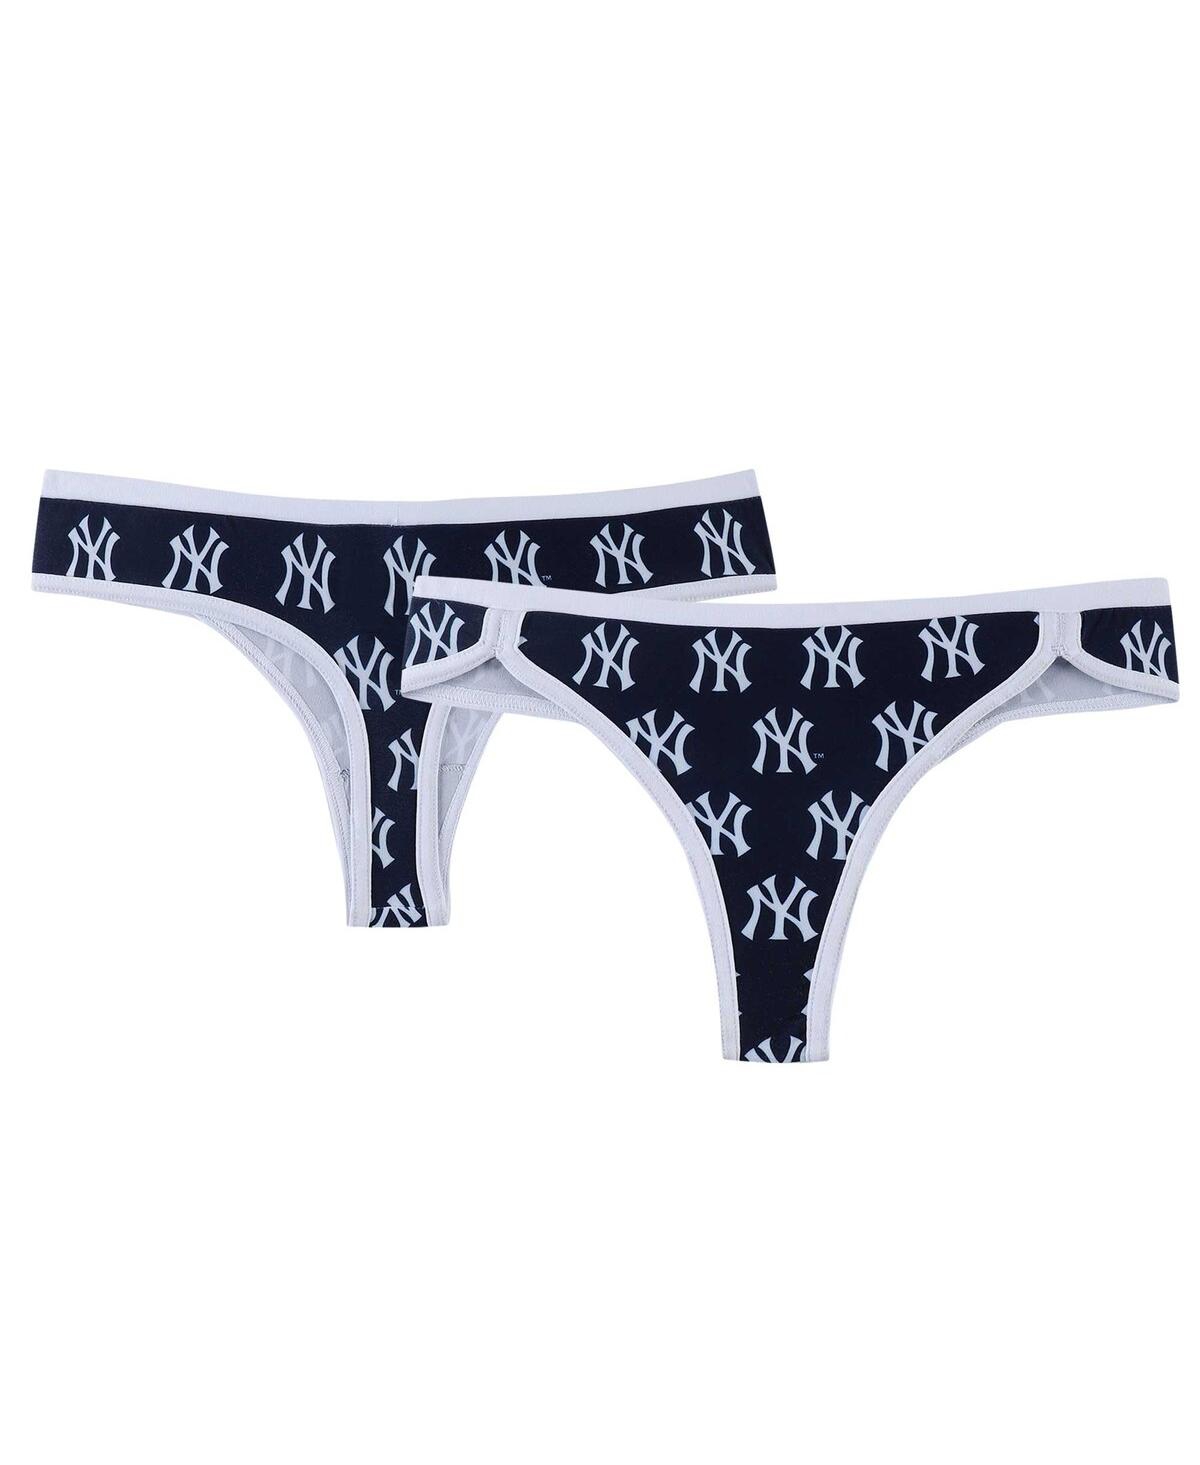 Concepts Sport Women's  Navy New York Yankees Allover Print Knit Thong Set